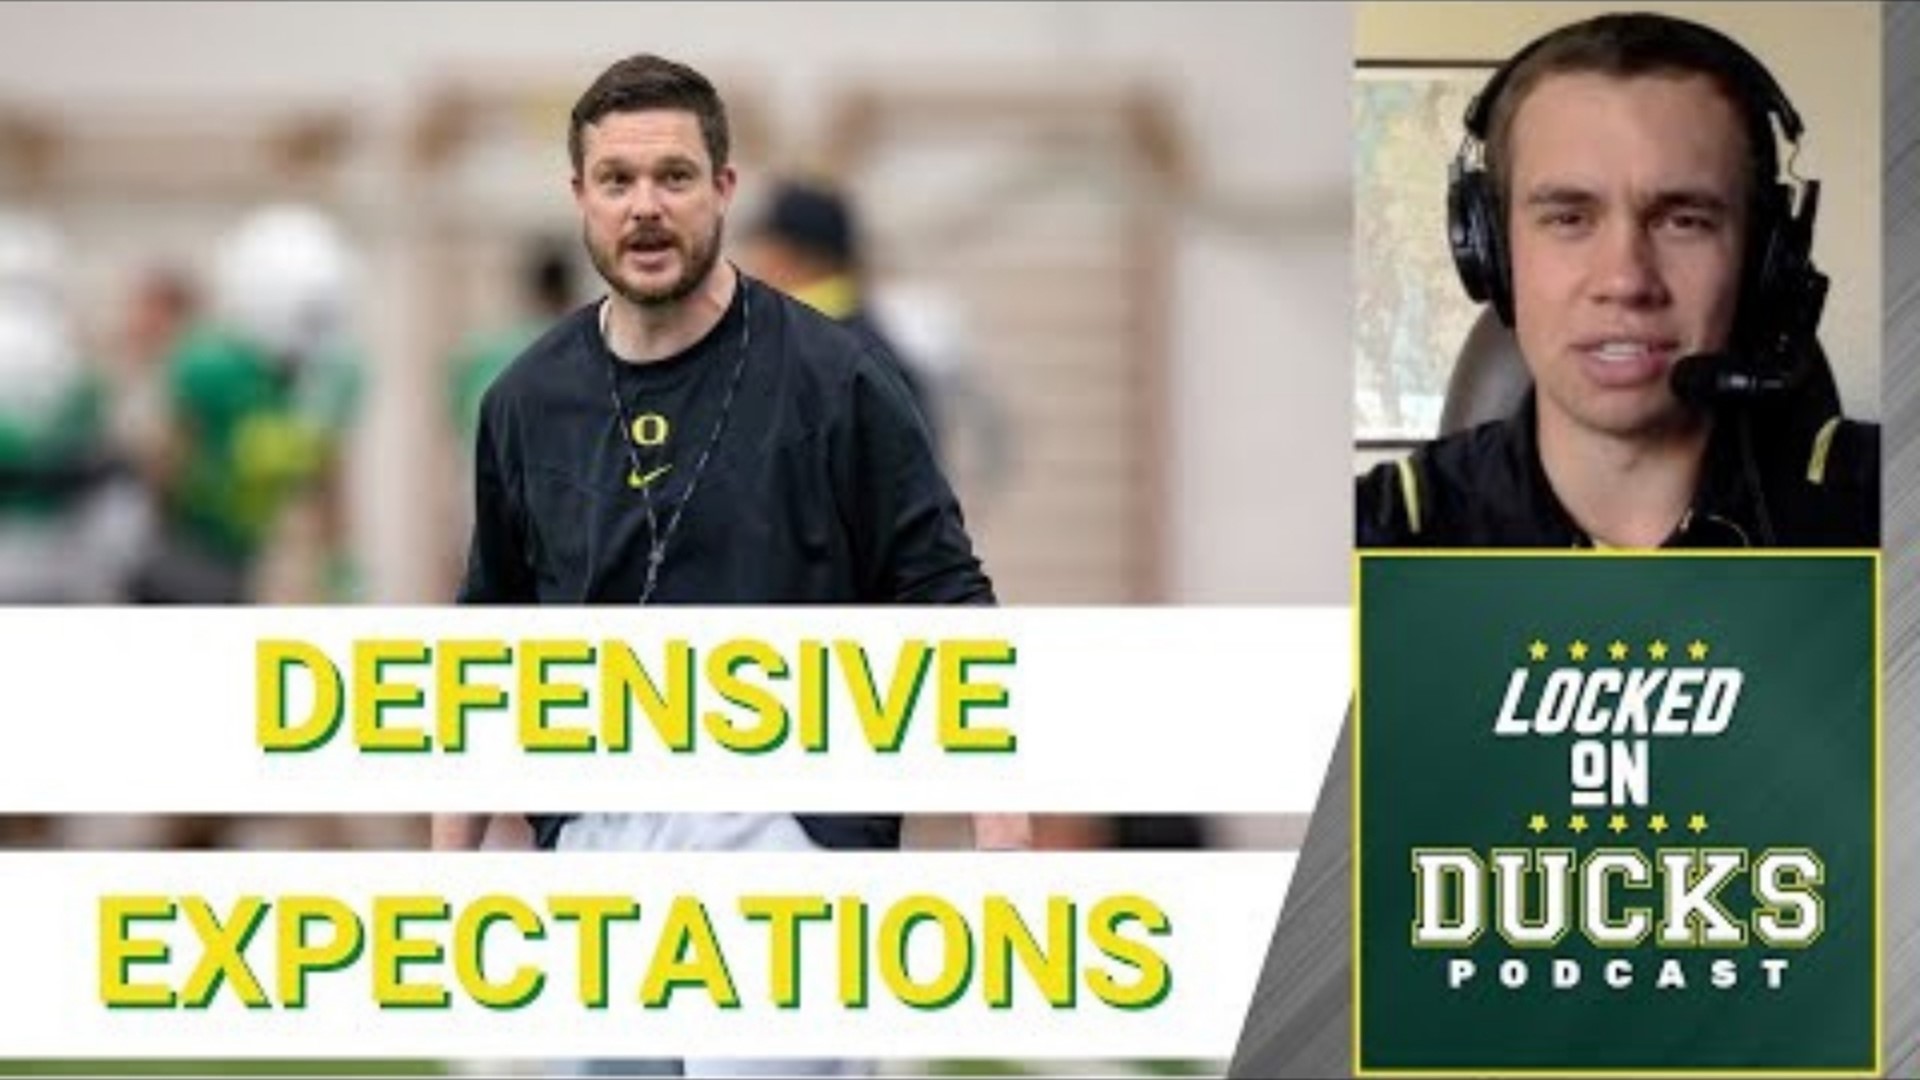 One reason Dan Lanning has Oregon fans excited about his hire is that his defense at Georgia last year was one of the best the sport has seen in recent memory.